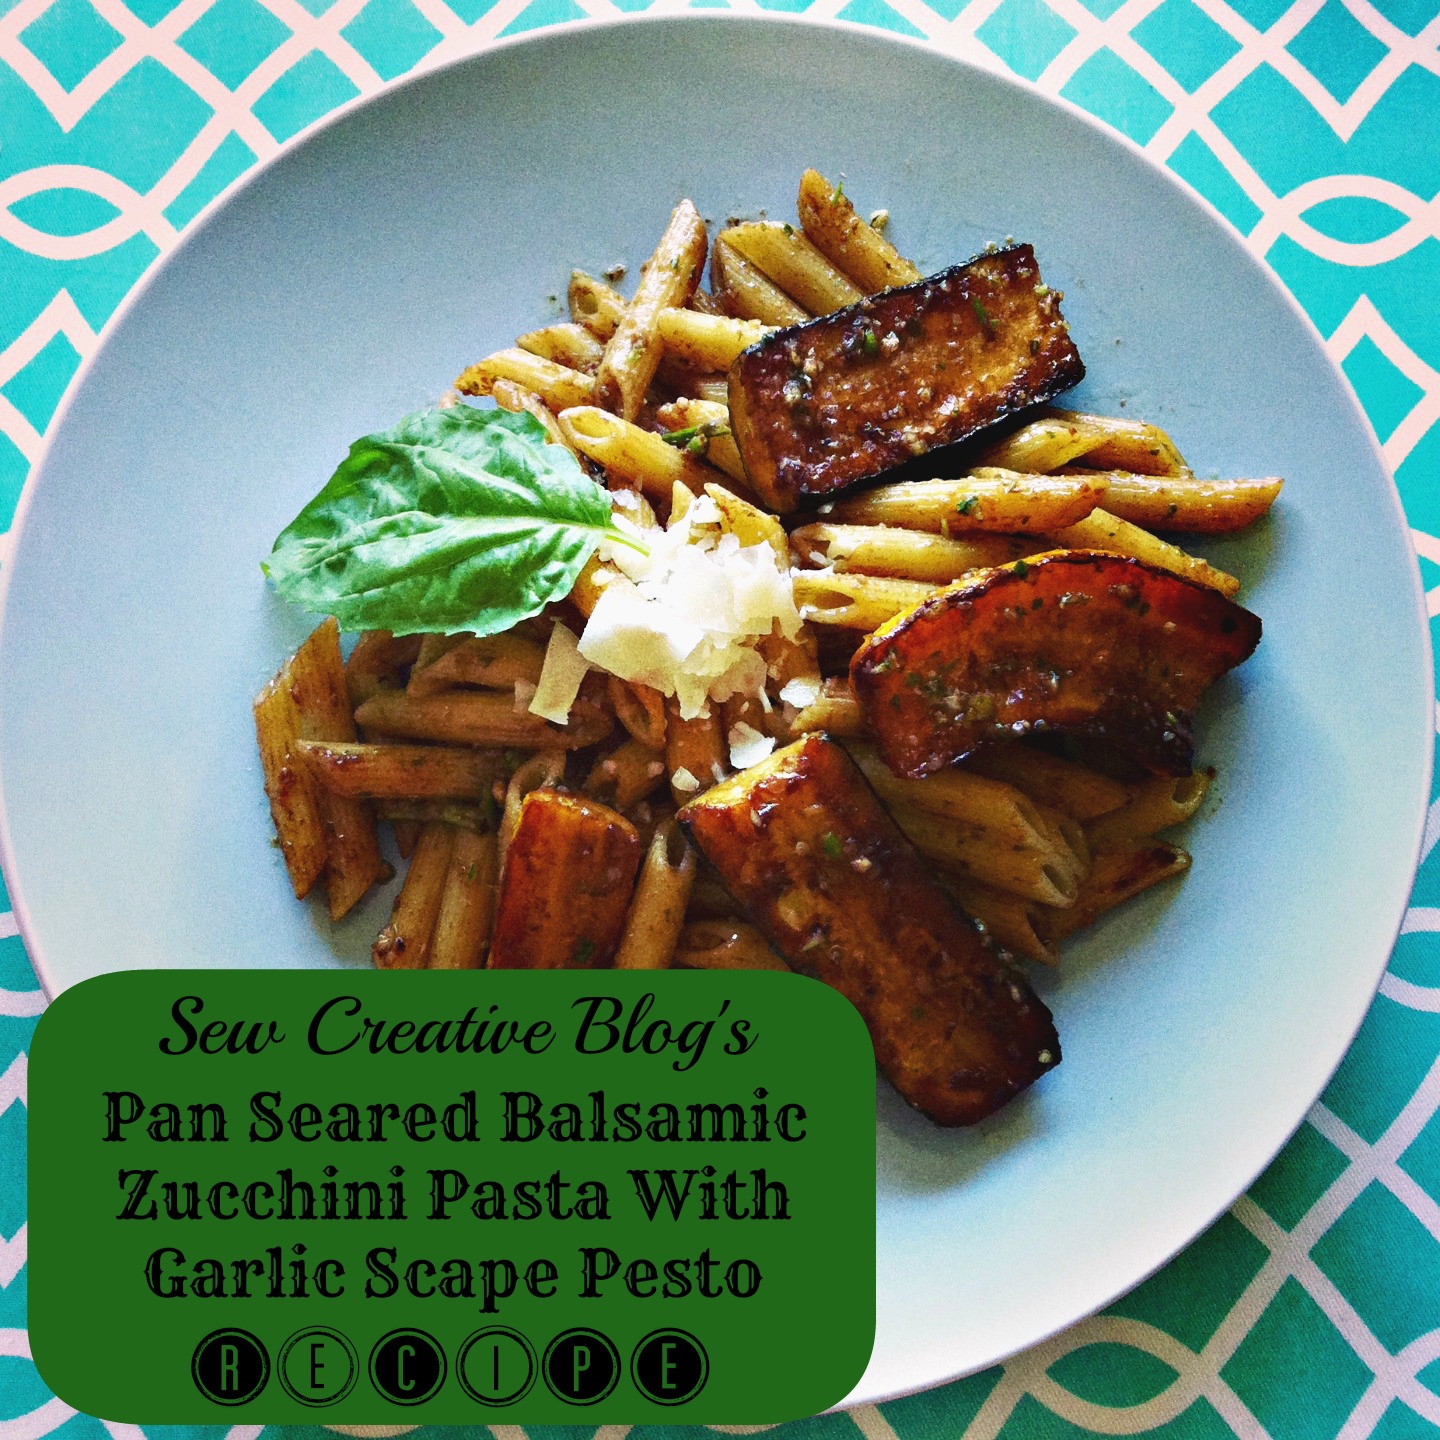 Pan Seared Balsamic Baby Summer Squash Zucchini Past with Garlic Scape Pesto Vegetarian Meal